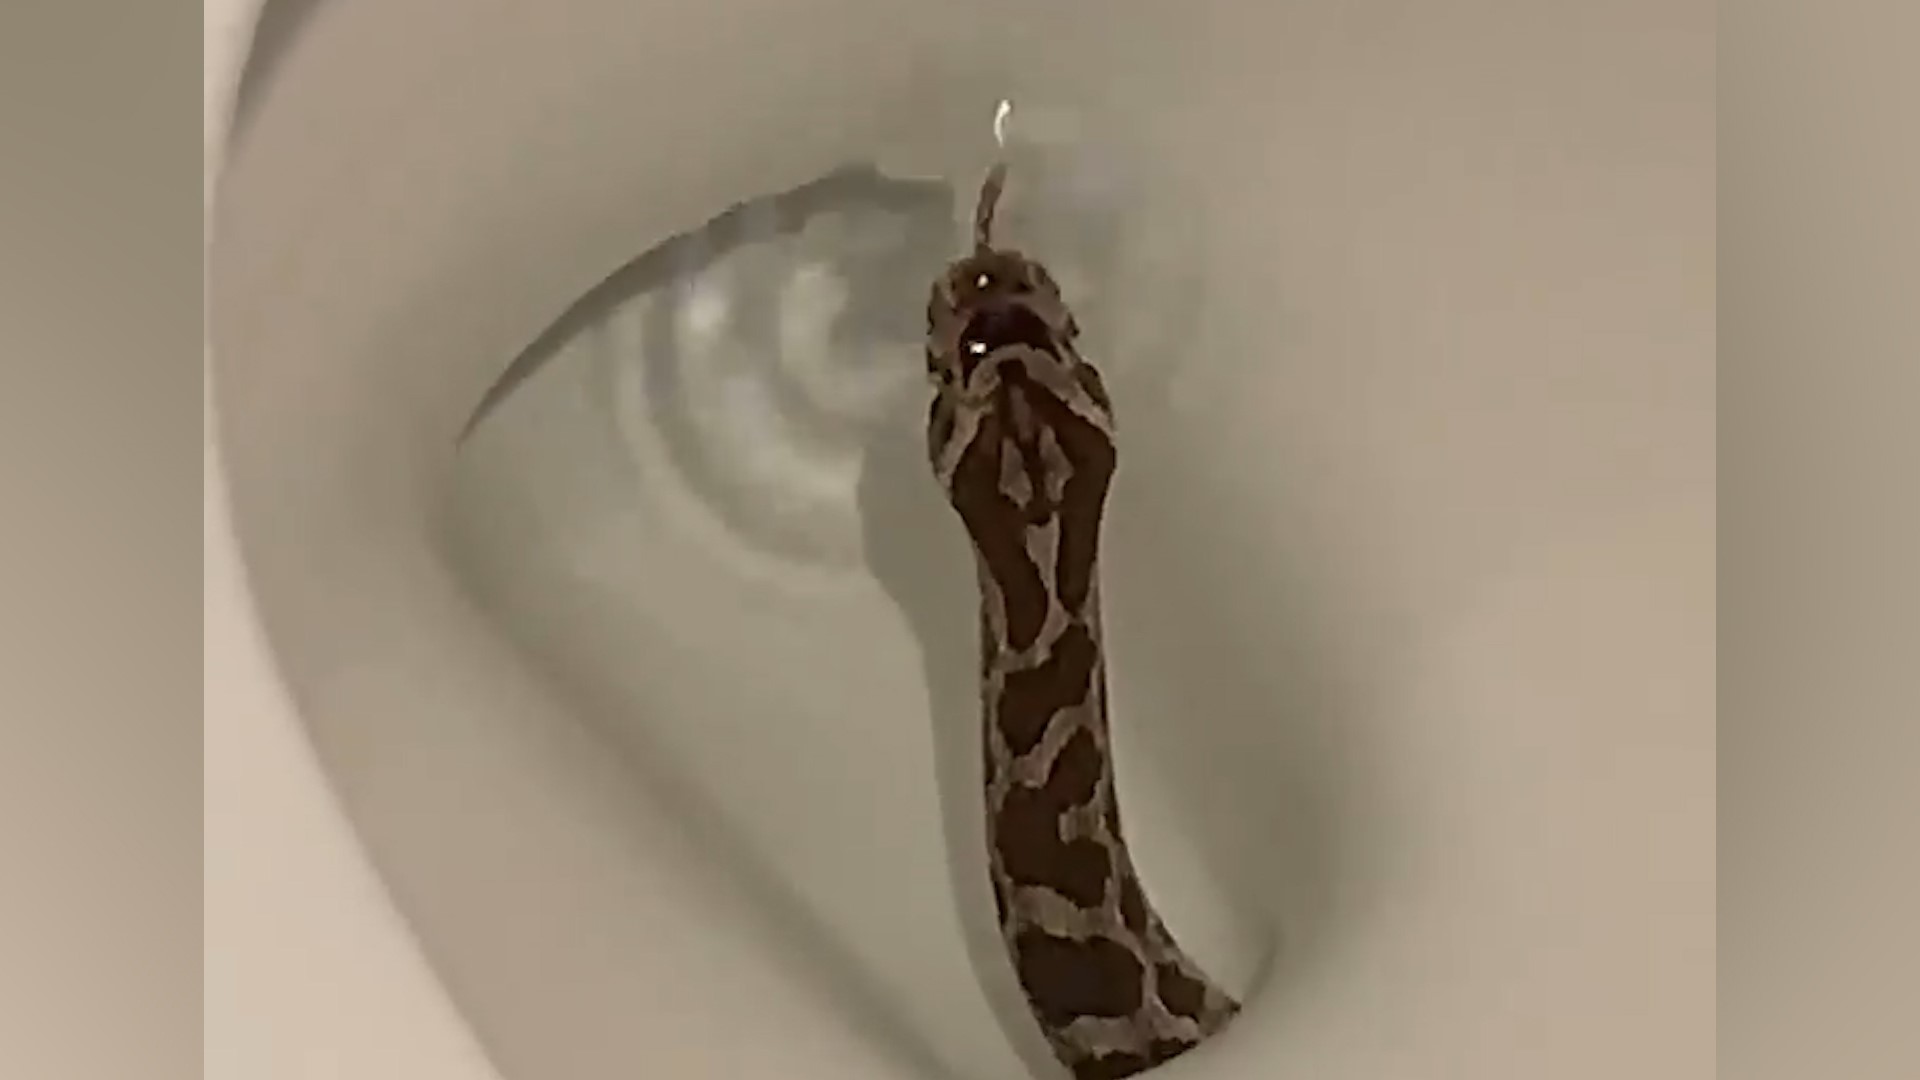 The man, whose Facebook profile says he lives in Abilene, recently posted to Facebook a video of a snake in his toilet.